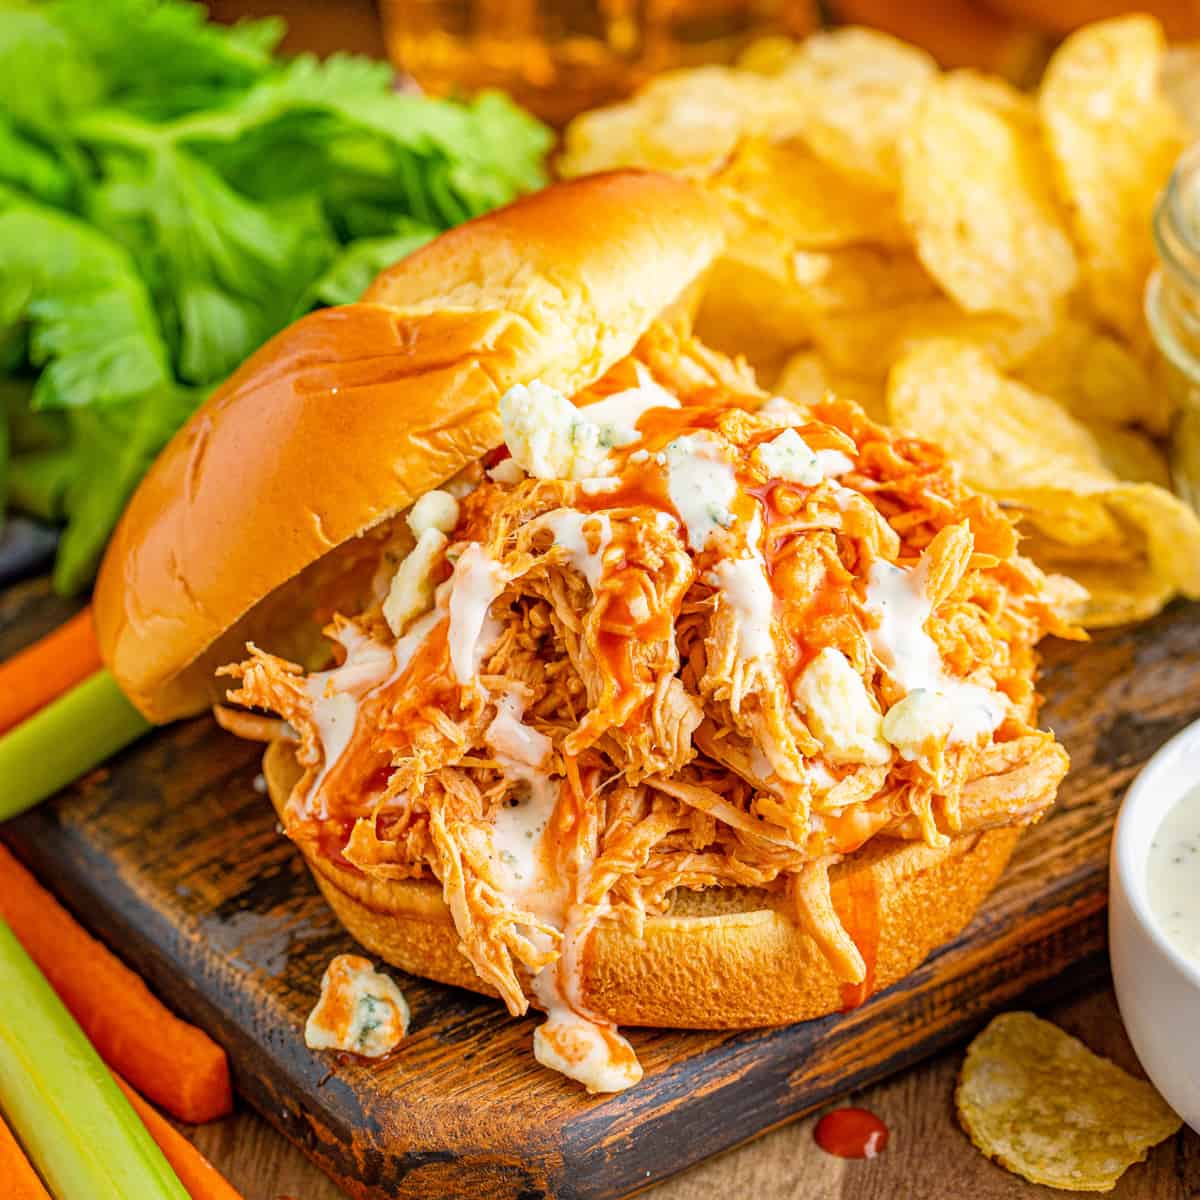 Square image of Buffalo Chicken Sandwiches on bun with hot sauce, ranch and blue cheese